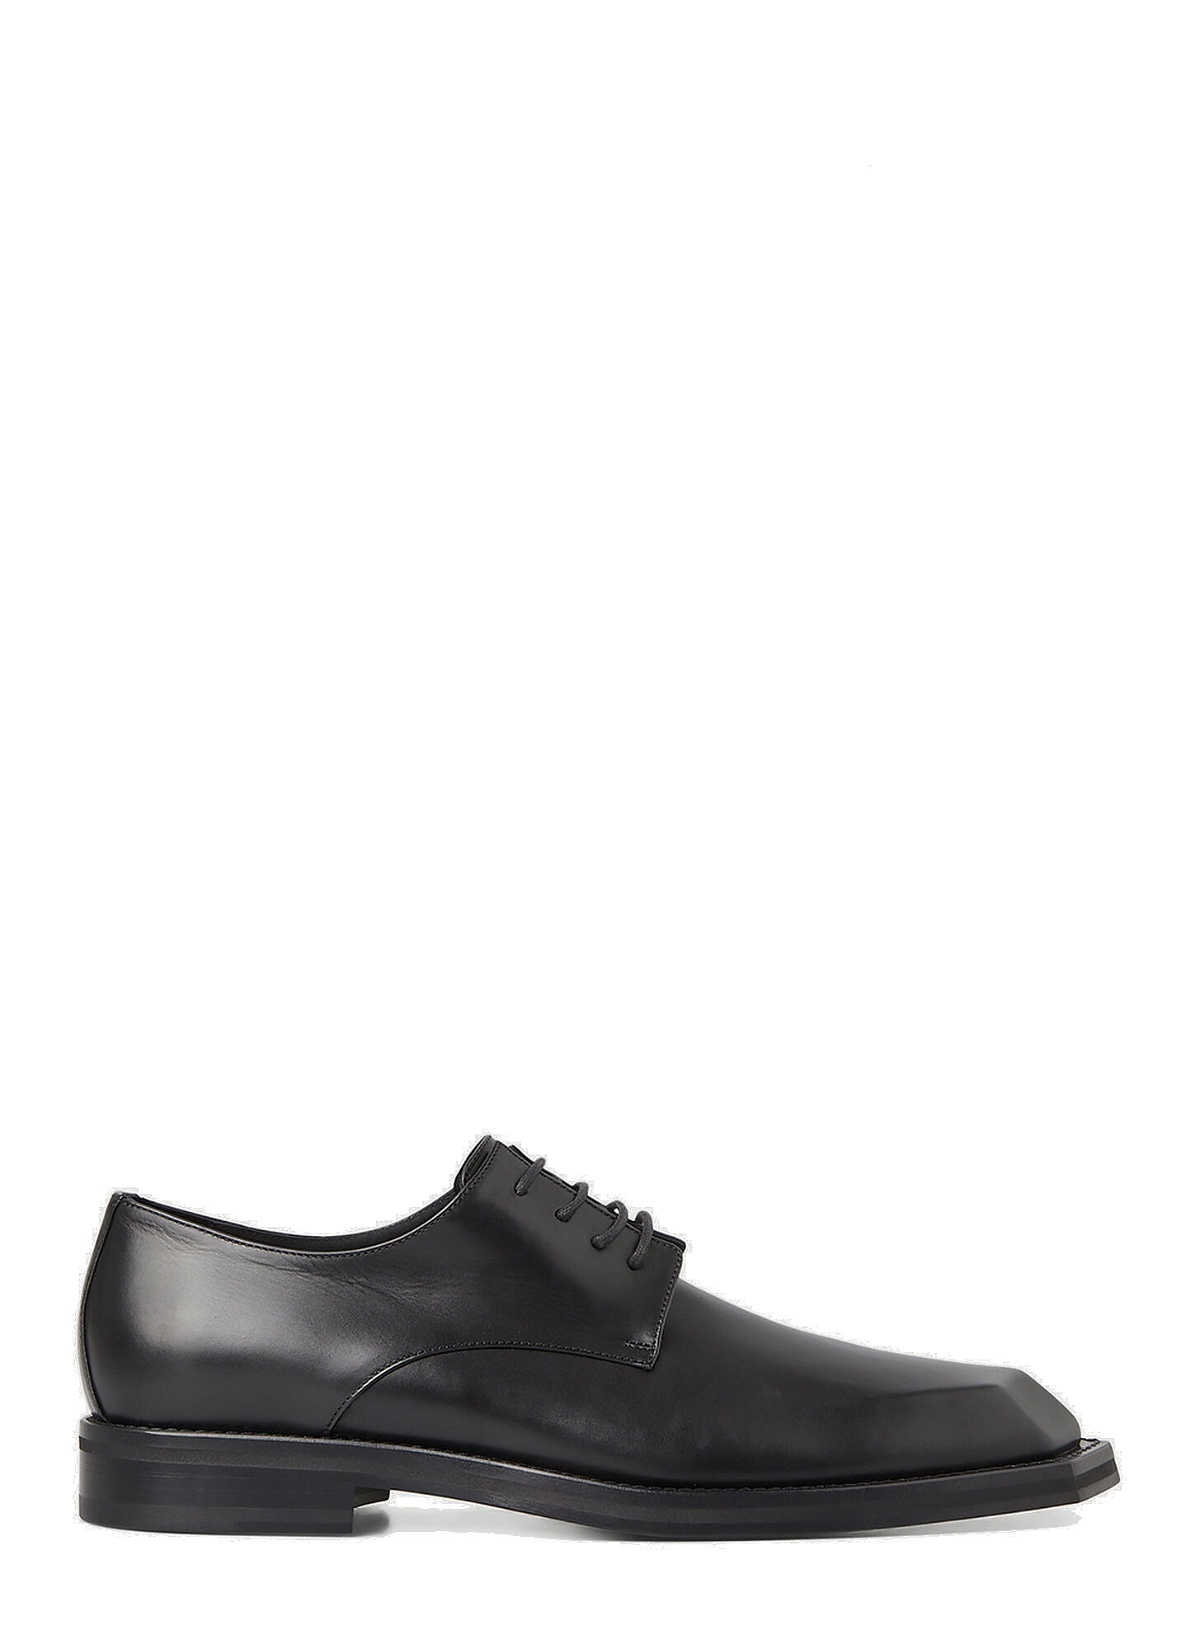 Photo: Chisel Toe Derby Shoes in Black